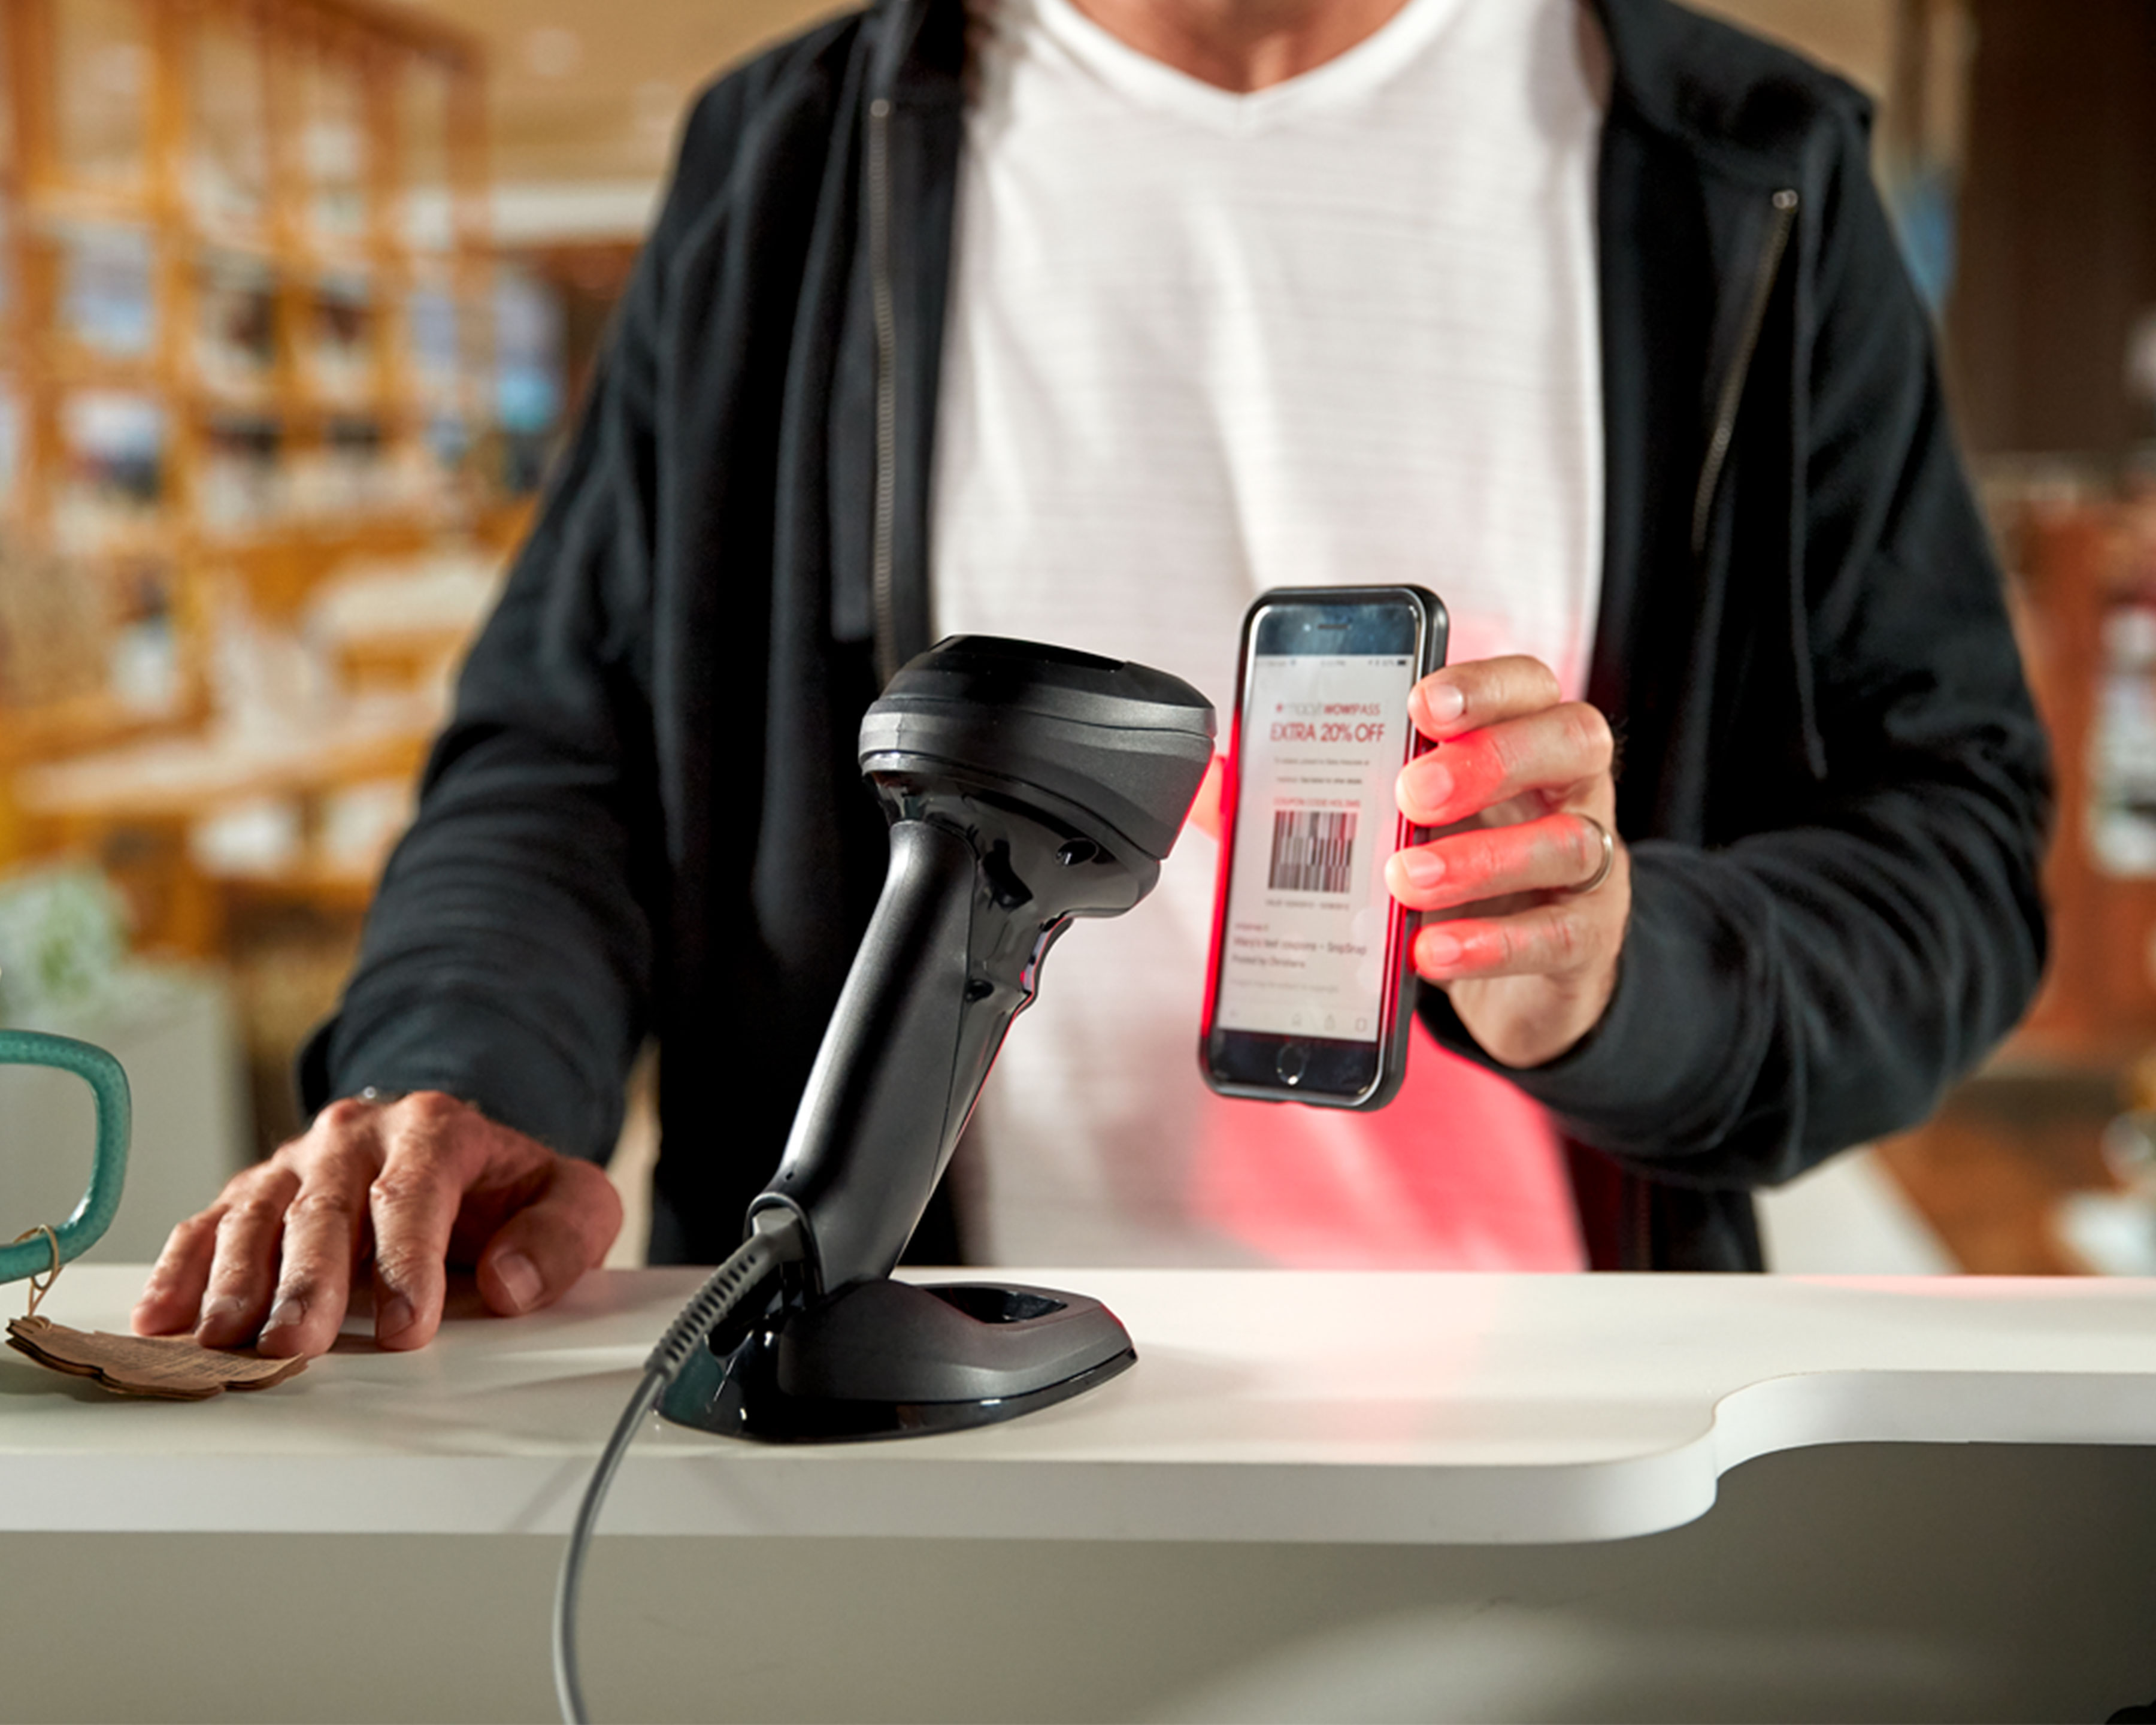 Customer uses hands free Zebra DS9900 barcode scanner to scan barcode on phone